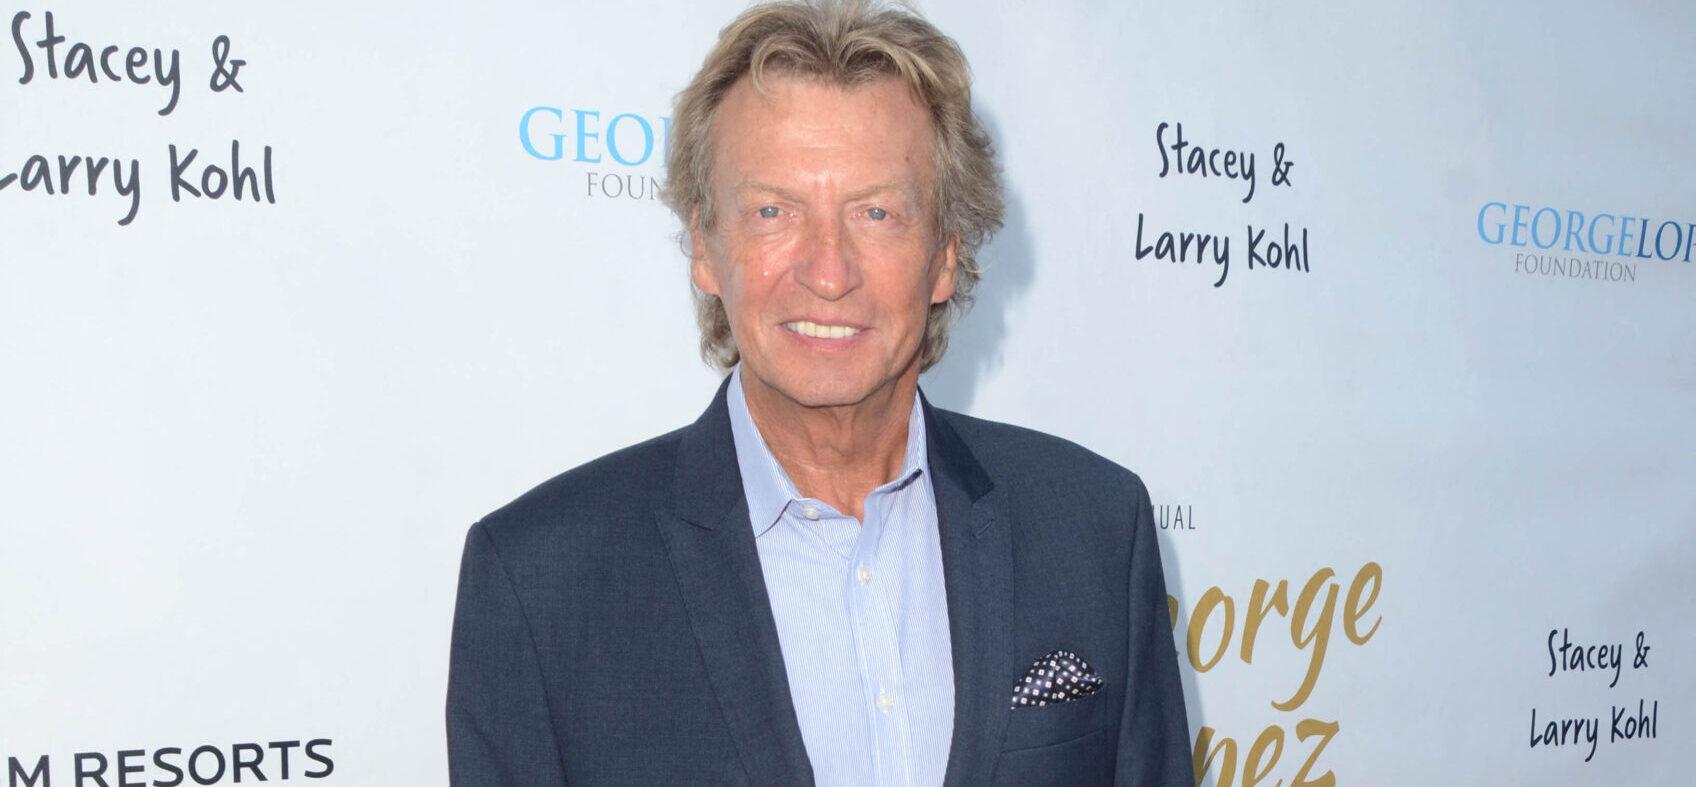 American Idol's Nigel Lythgoe Sued For Another Alleged Sexual Assault